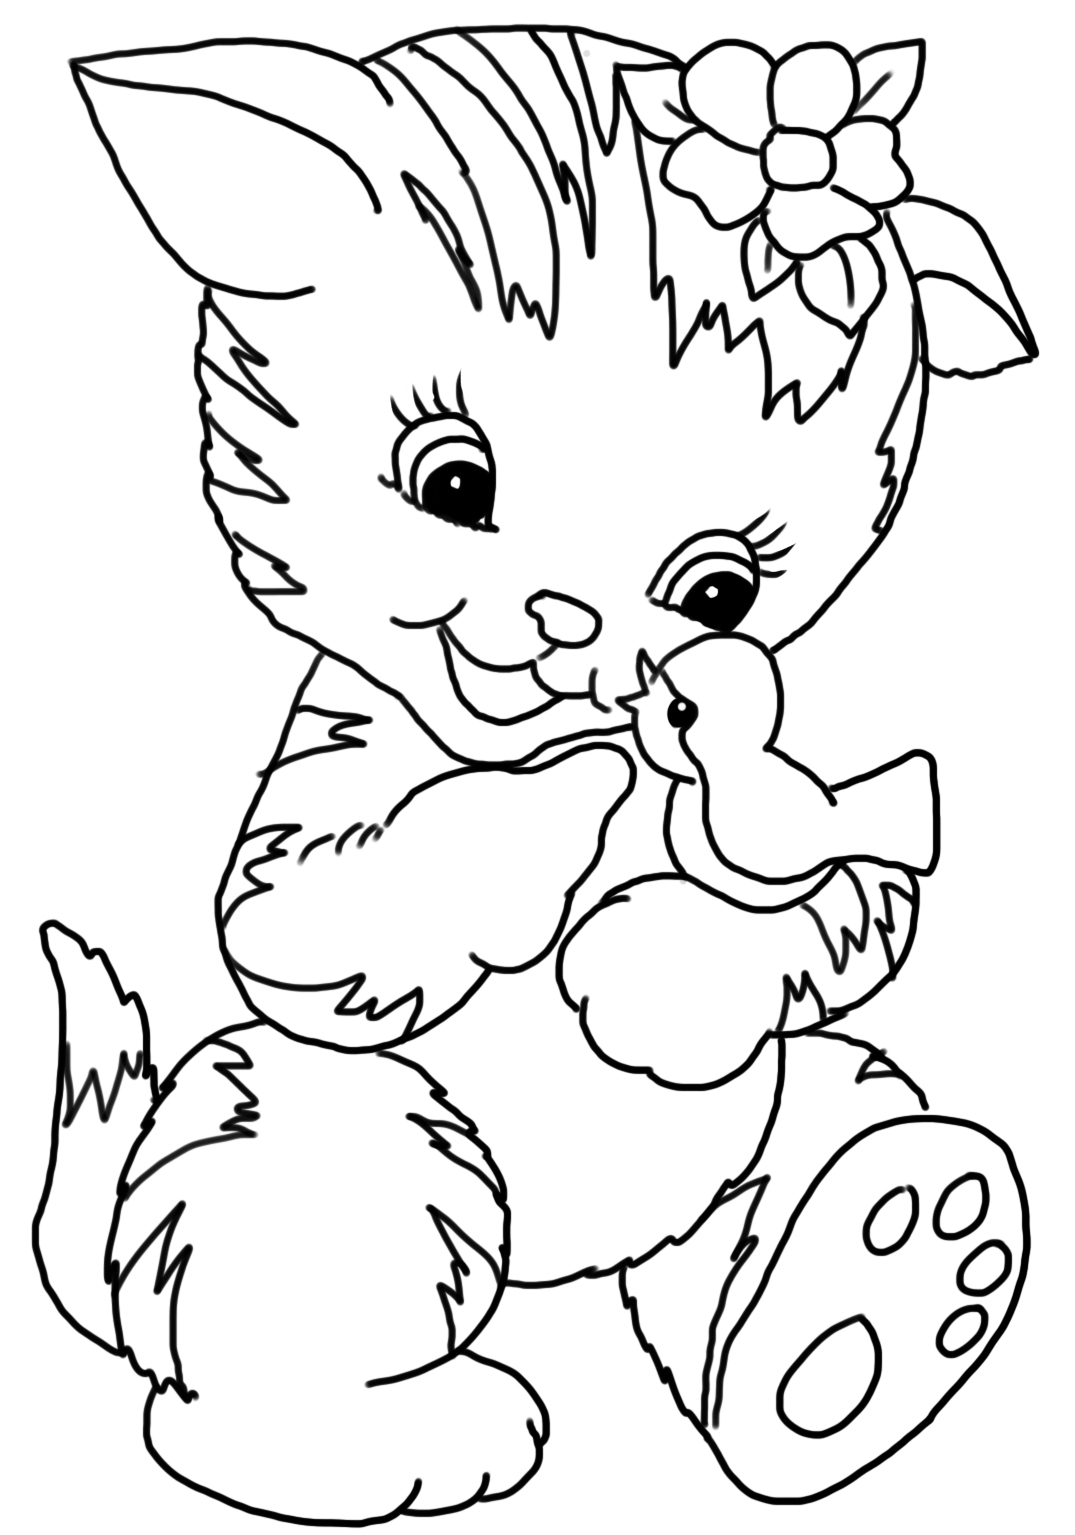 cat coloring page cute cat with bird